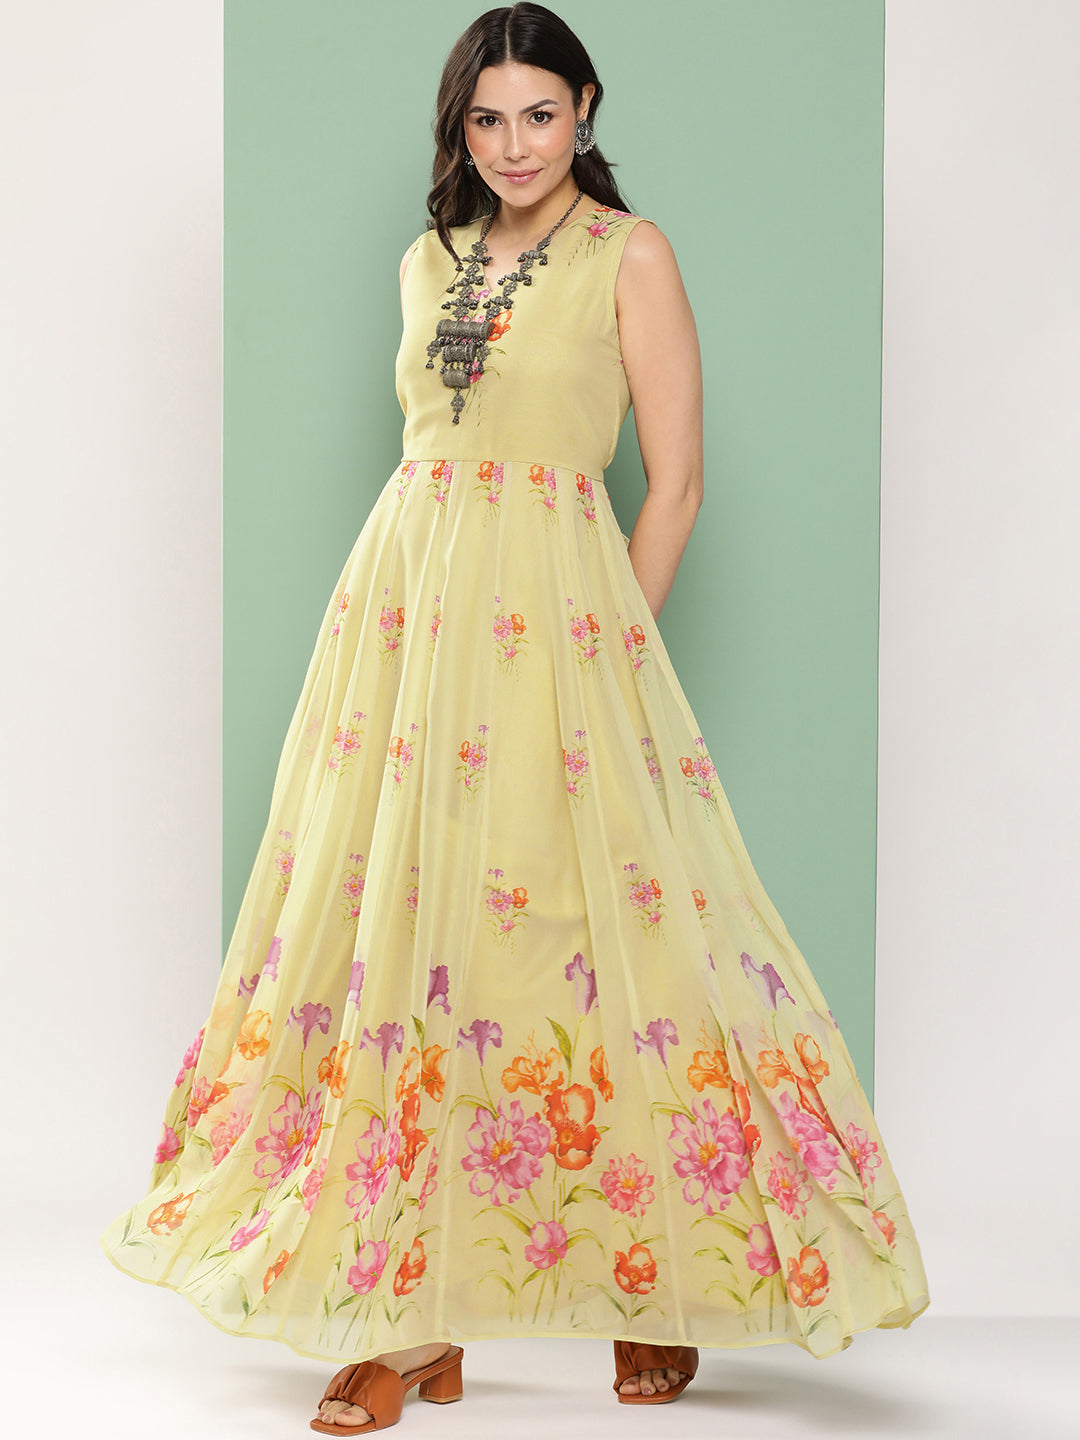 Women's Yellow Printed Long Dress V-Neck With Lace Details - Bhama Couture